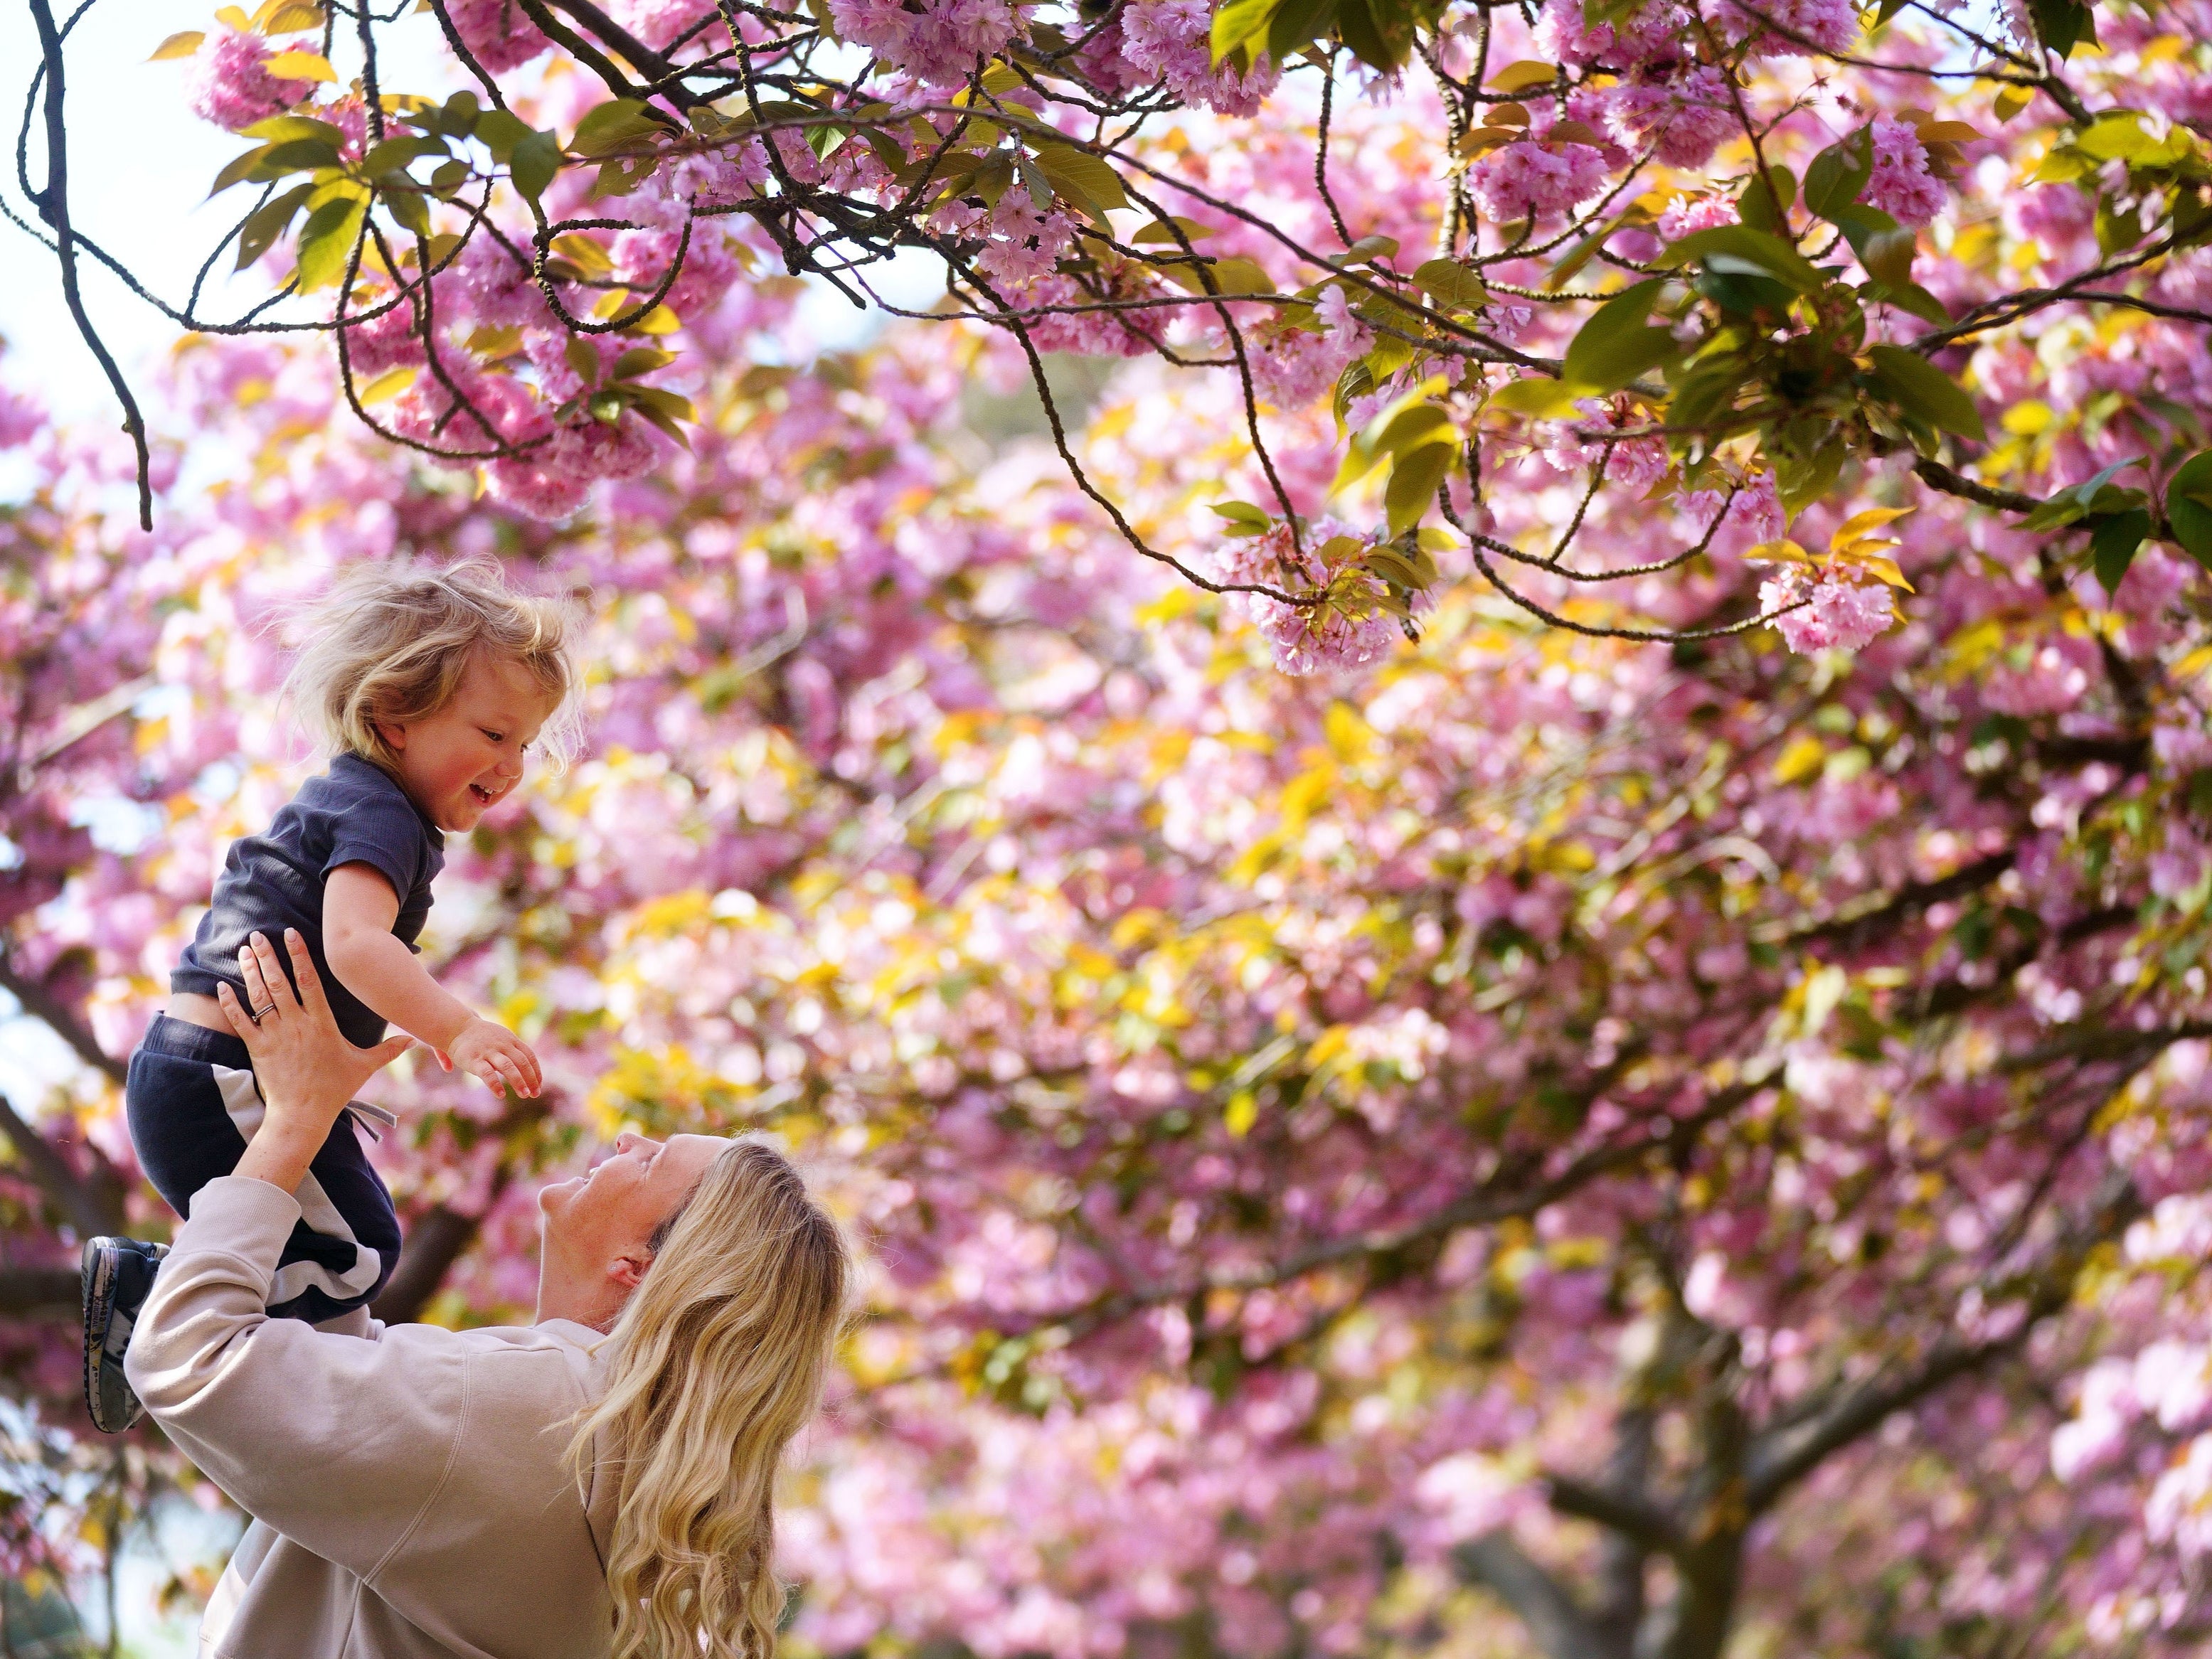 A woman lifts her child into the air under an avenue of blossom trees in Greenwich Park, London, ahead of Blossom Watch day